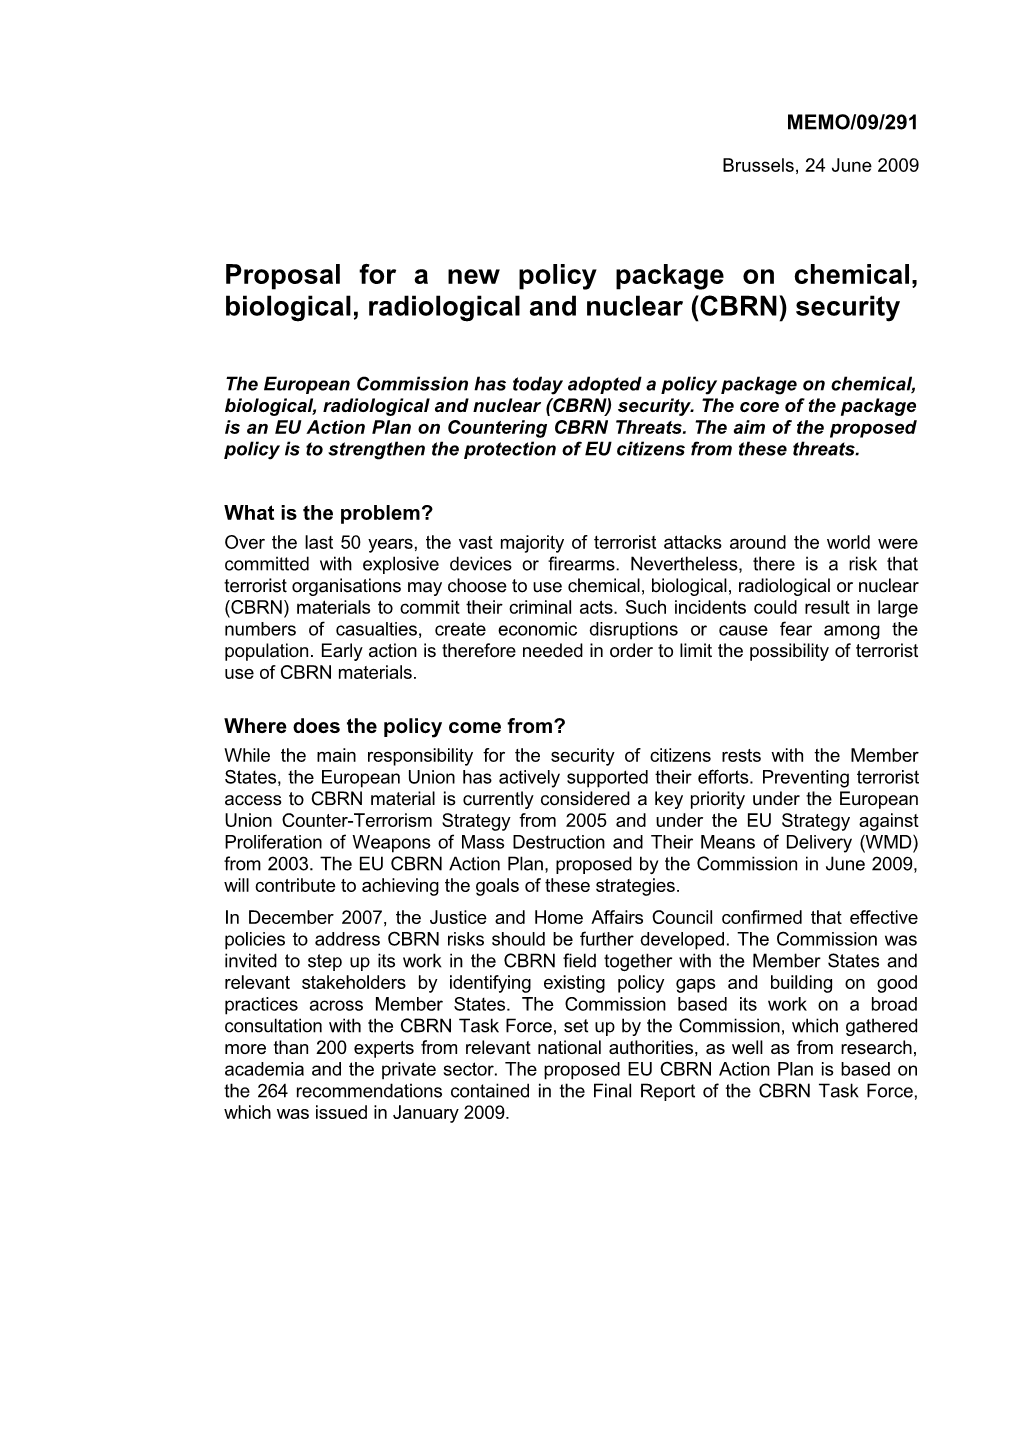 Proposal for a New Policy Package on Chemical, Biological, Radiological and Nuclear (CBRN)